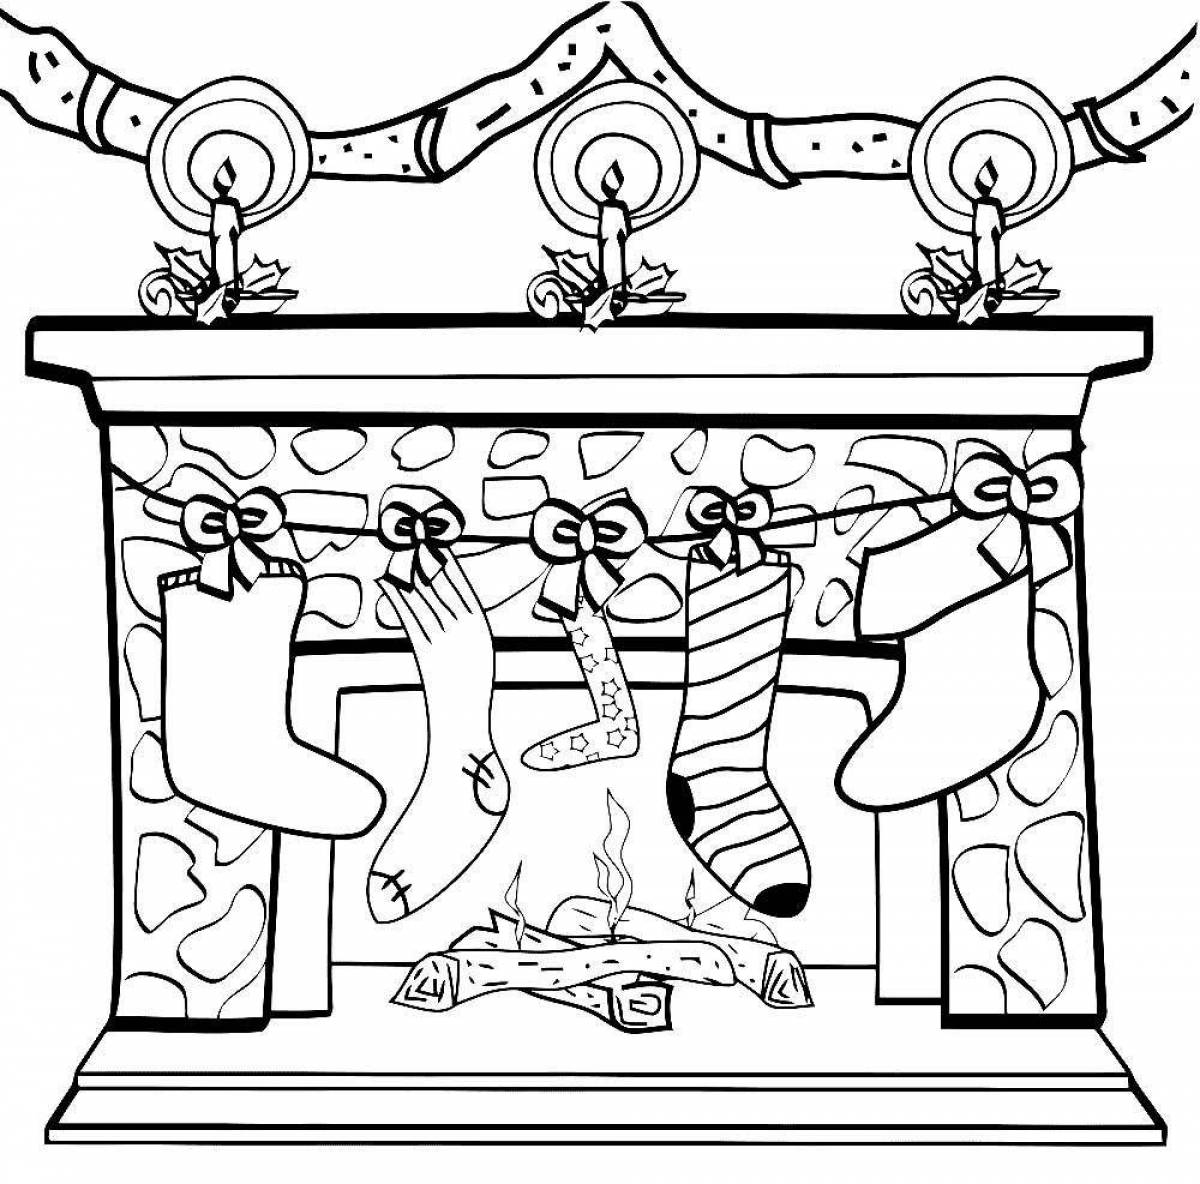 Colorful fireplace coloring page for kids